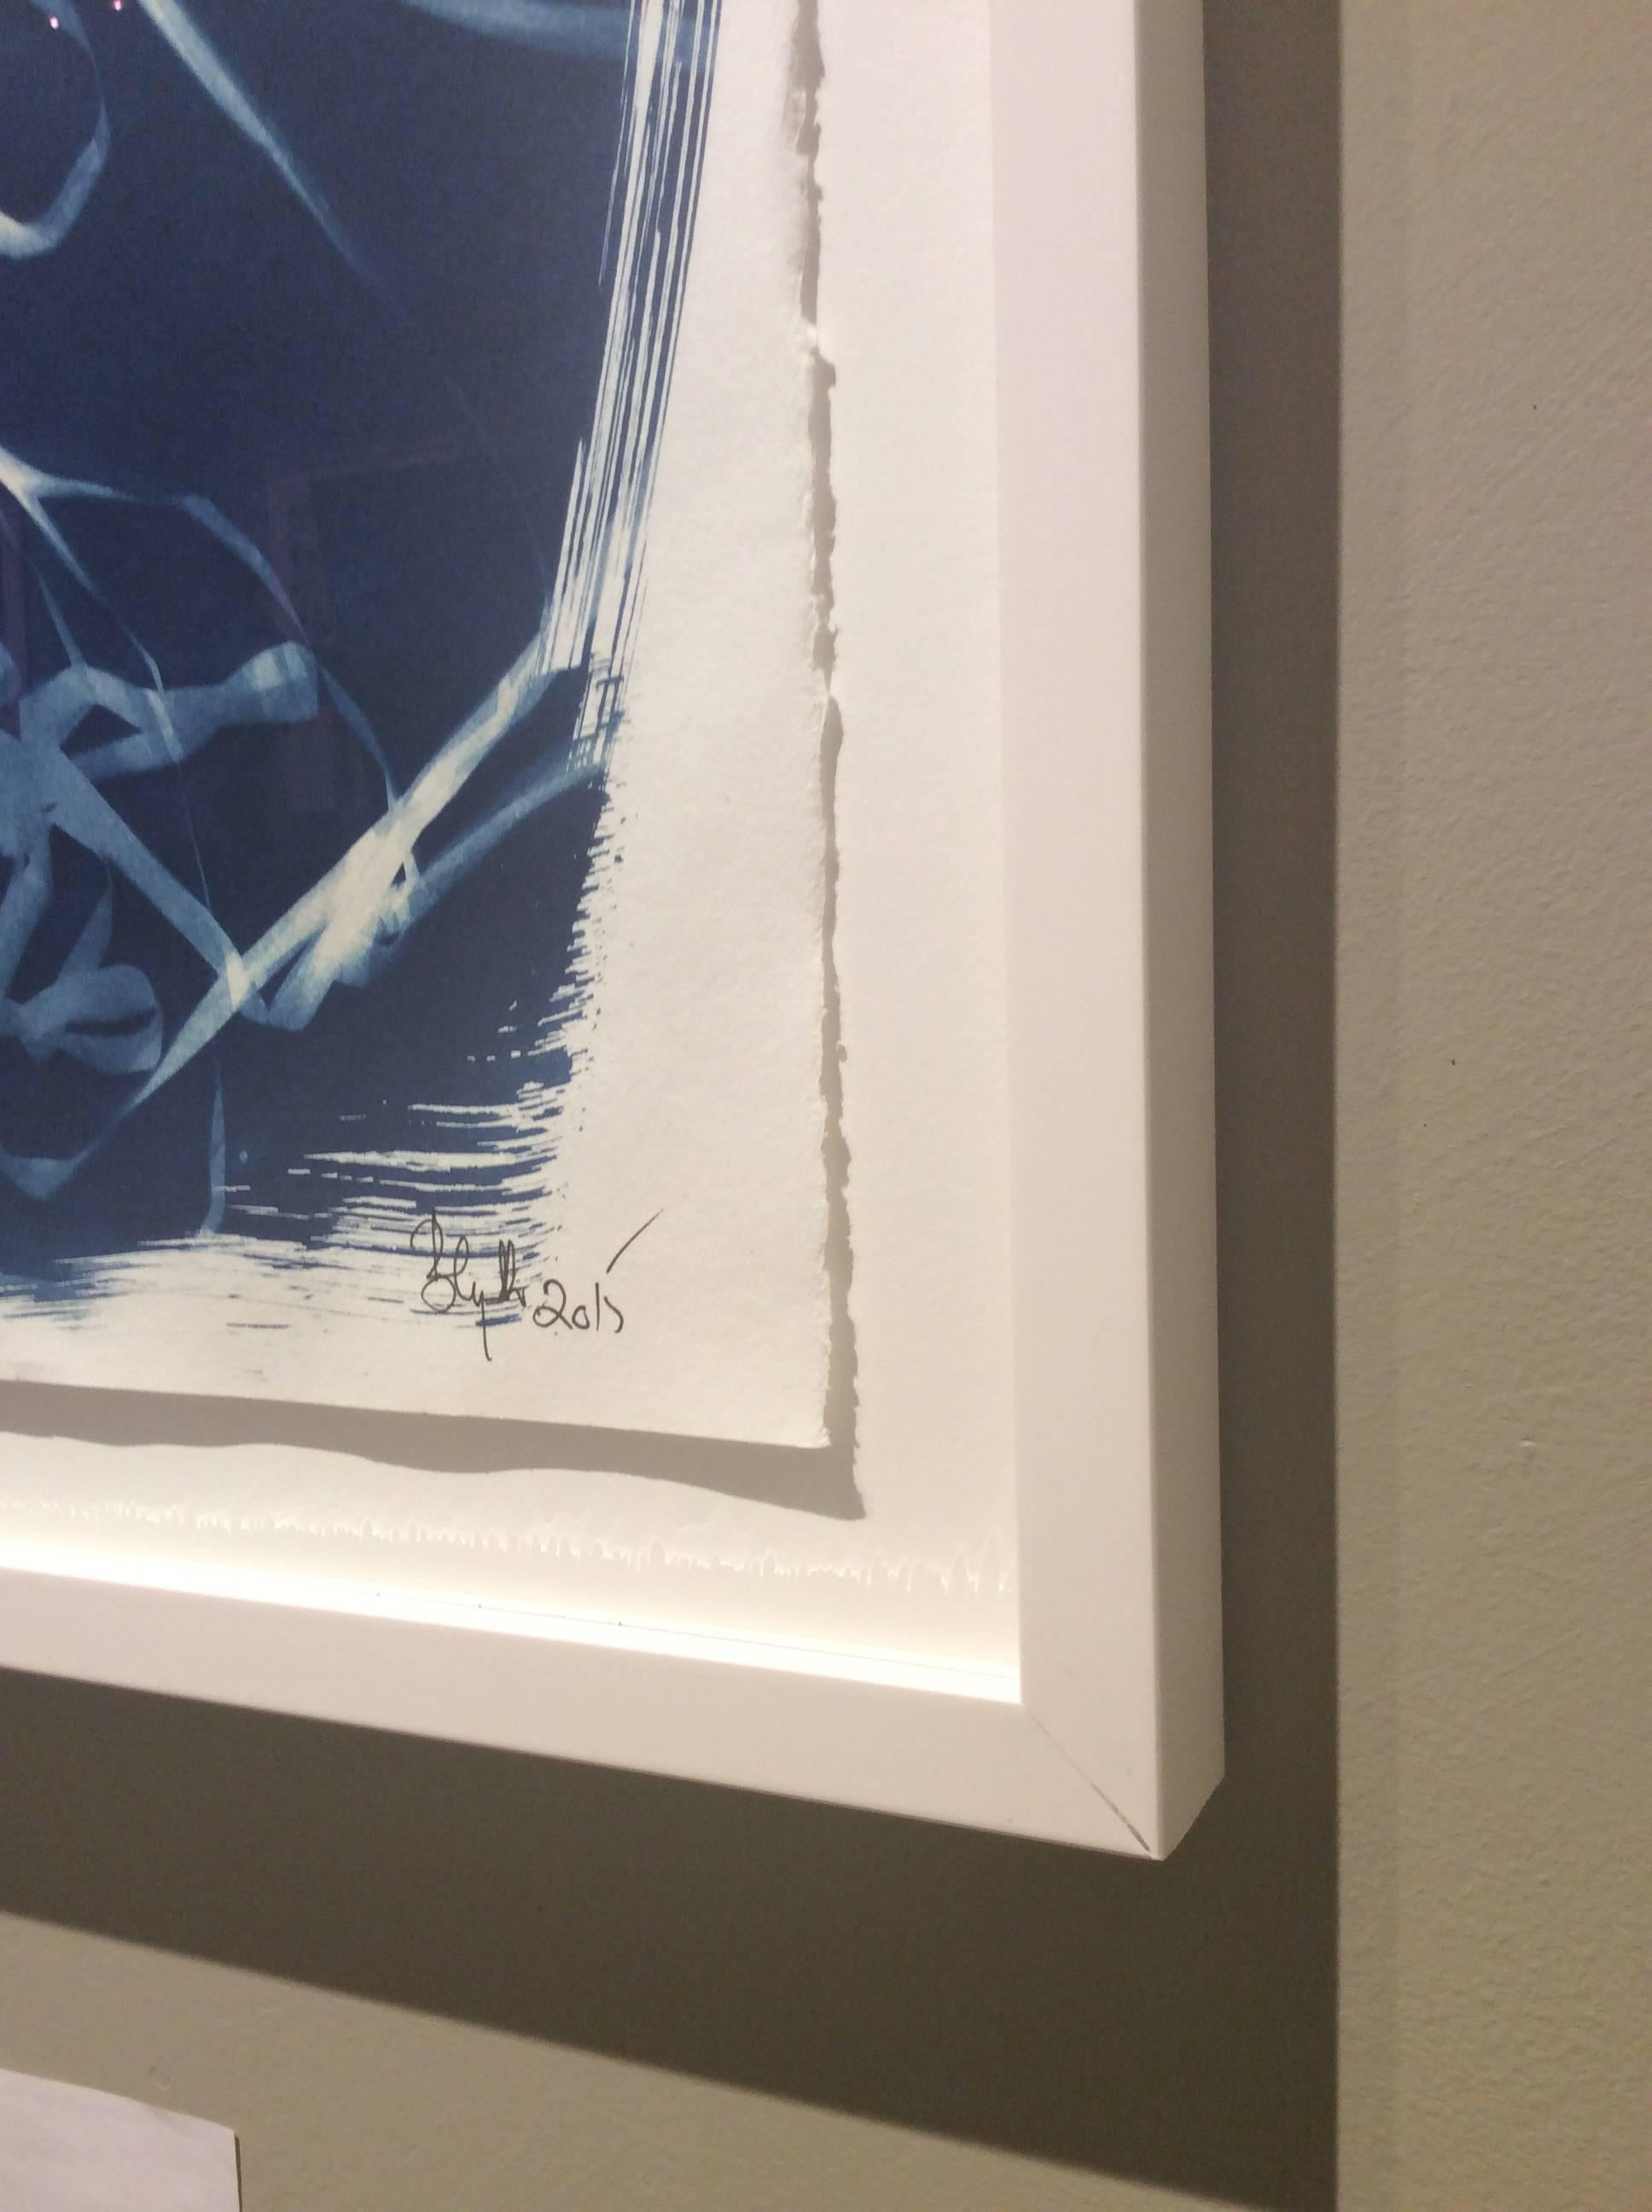 Unique cyanotype on rag paper
29 x 22 inches unframed
33 x 26.75 inches in simple white frame, AR non glare glass

This contemporary unique blue cyanotype photograph was completed by Birgit Blyth in 2015. Cyanotypes are the beautiful result of a